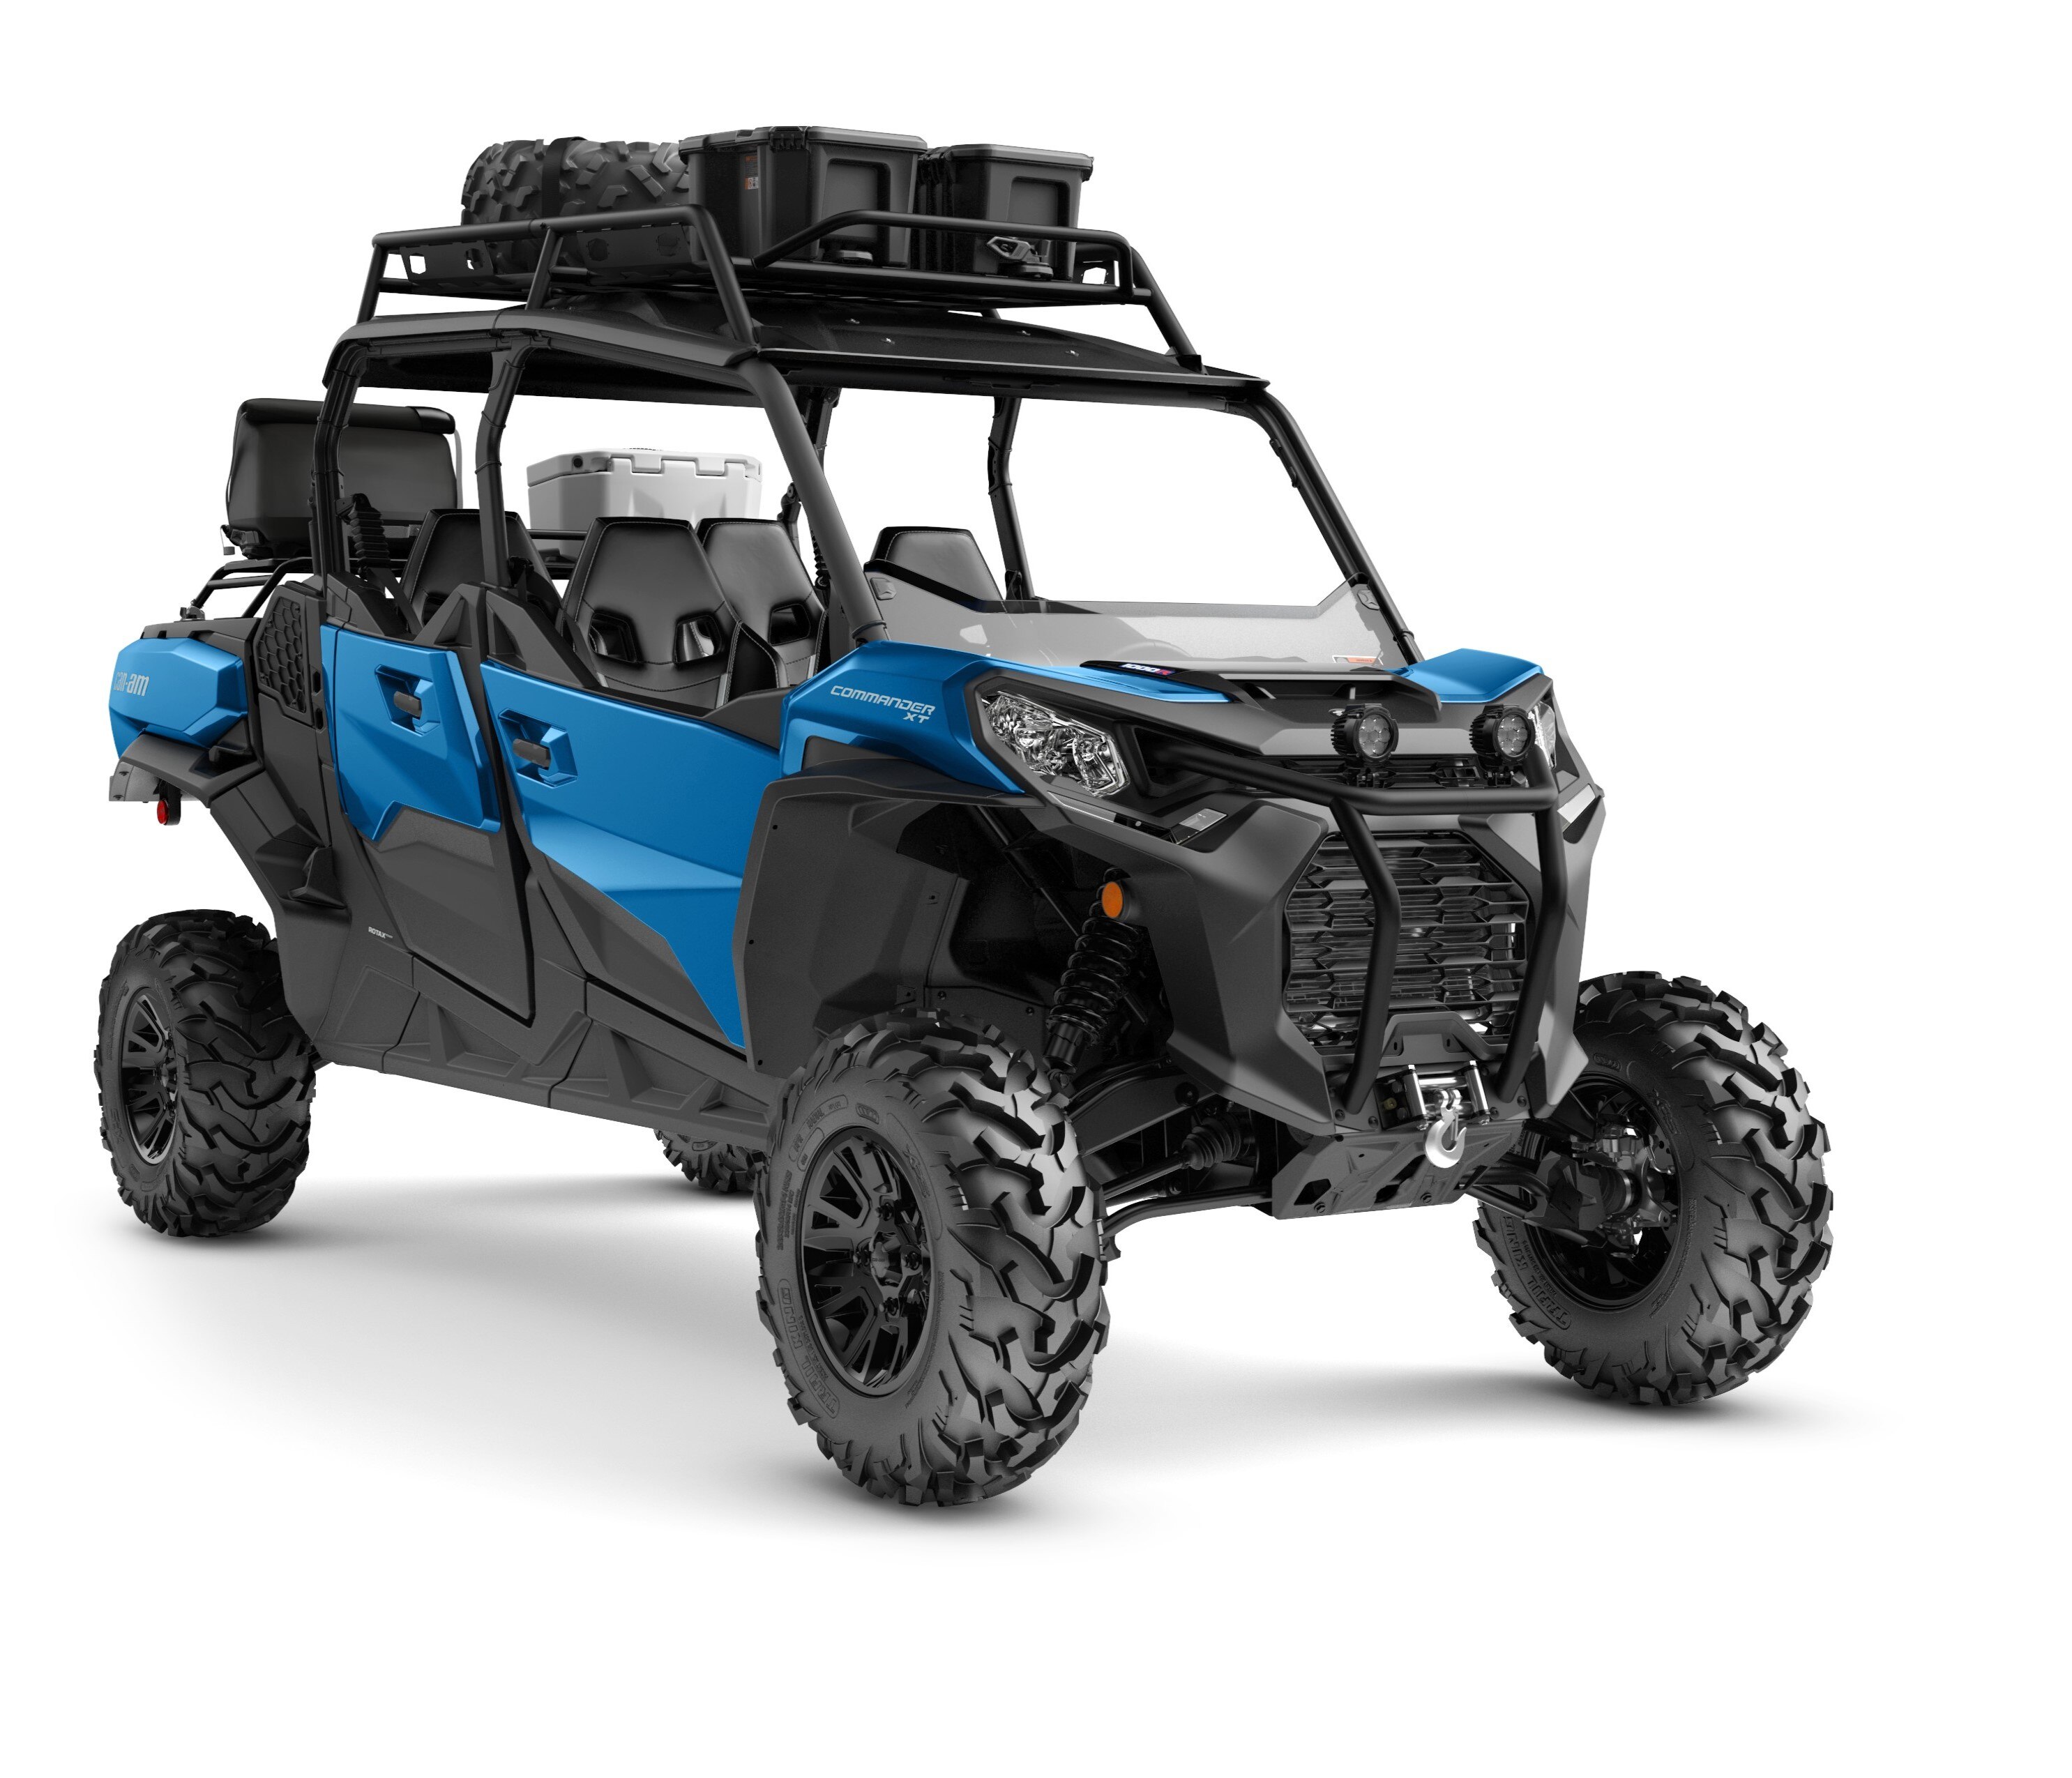 Can-Am Commander side-by-side accessorized for expedition